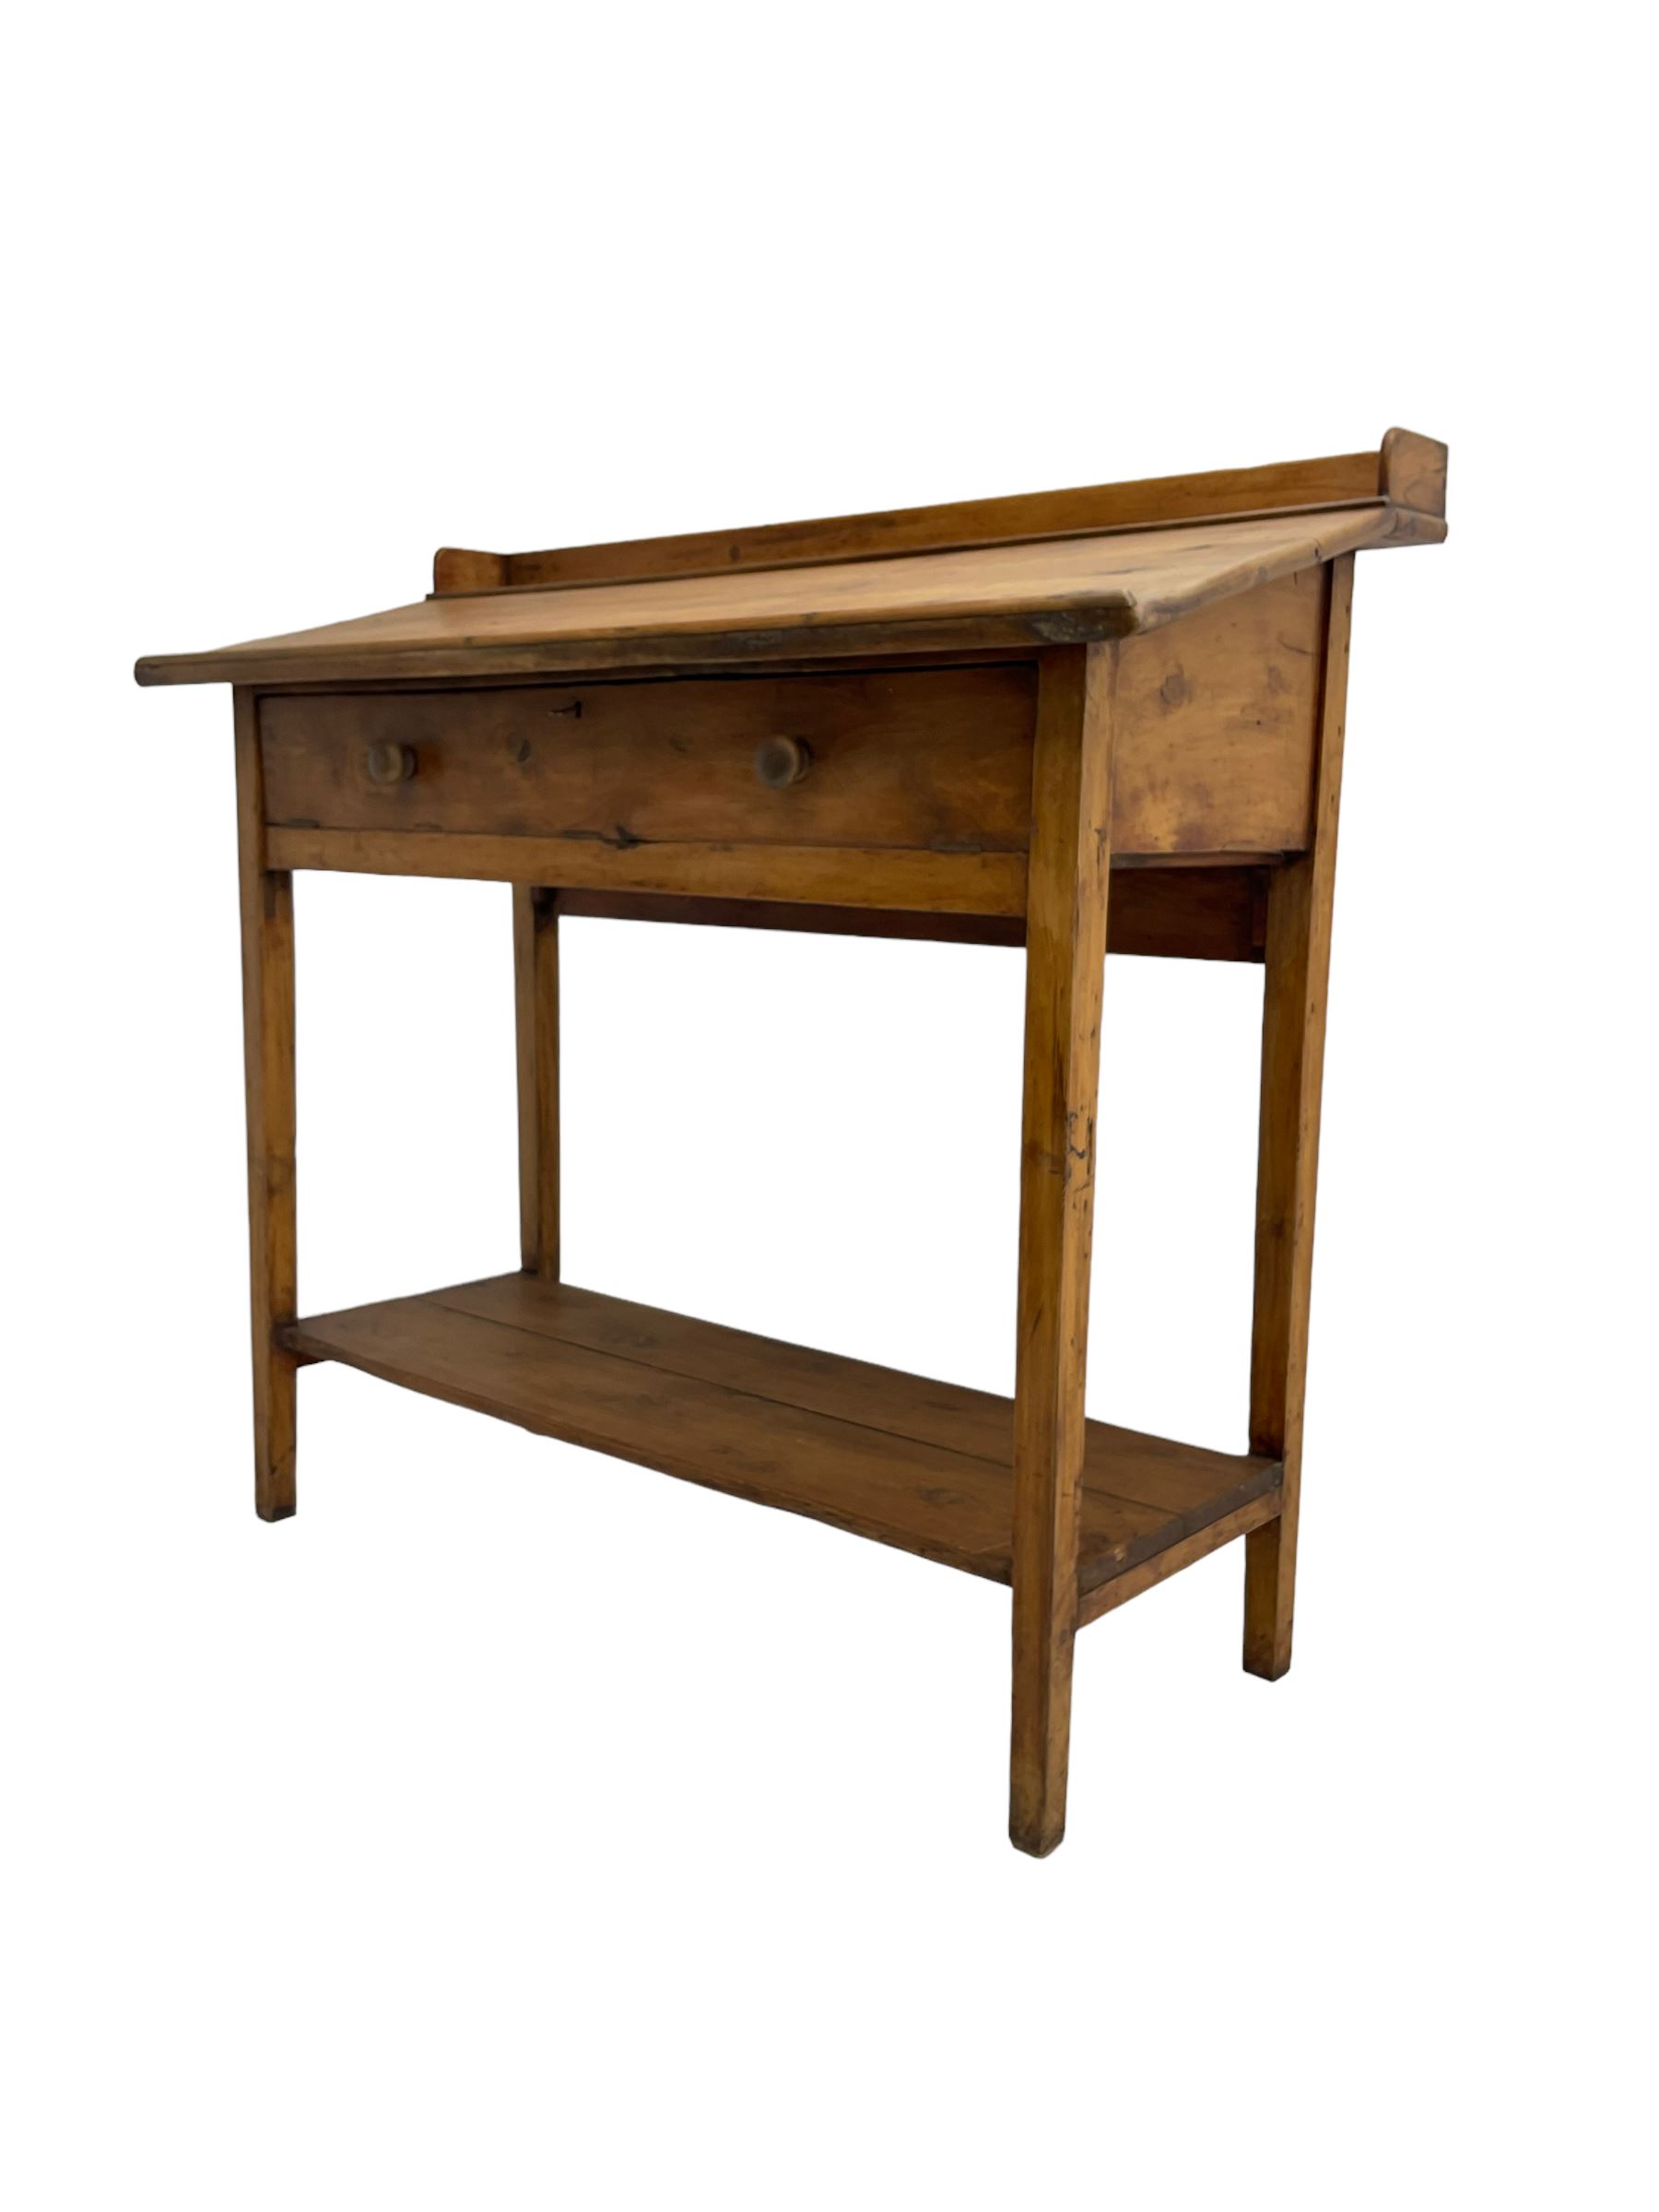 Stained pine clerks desk or table - Image 5 of 6